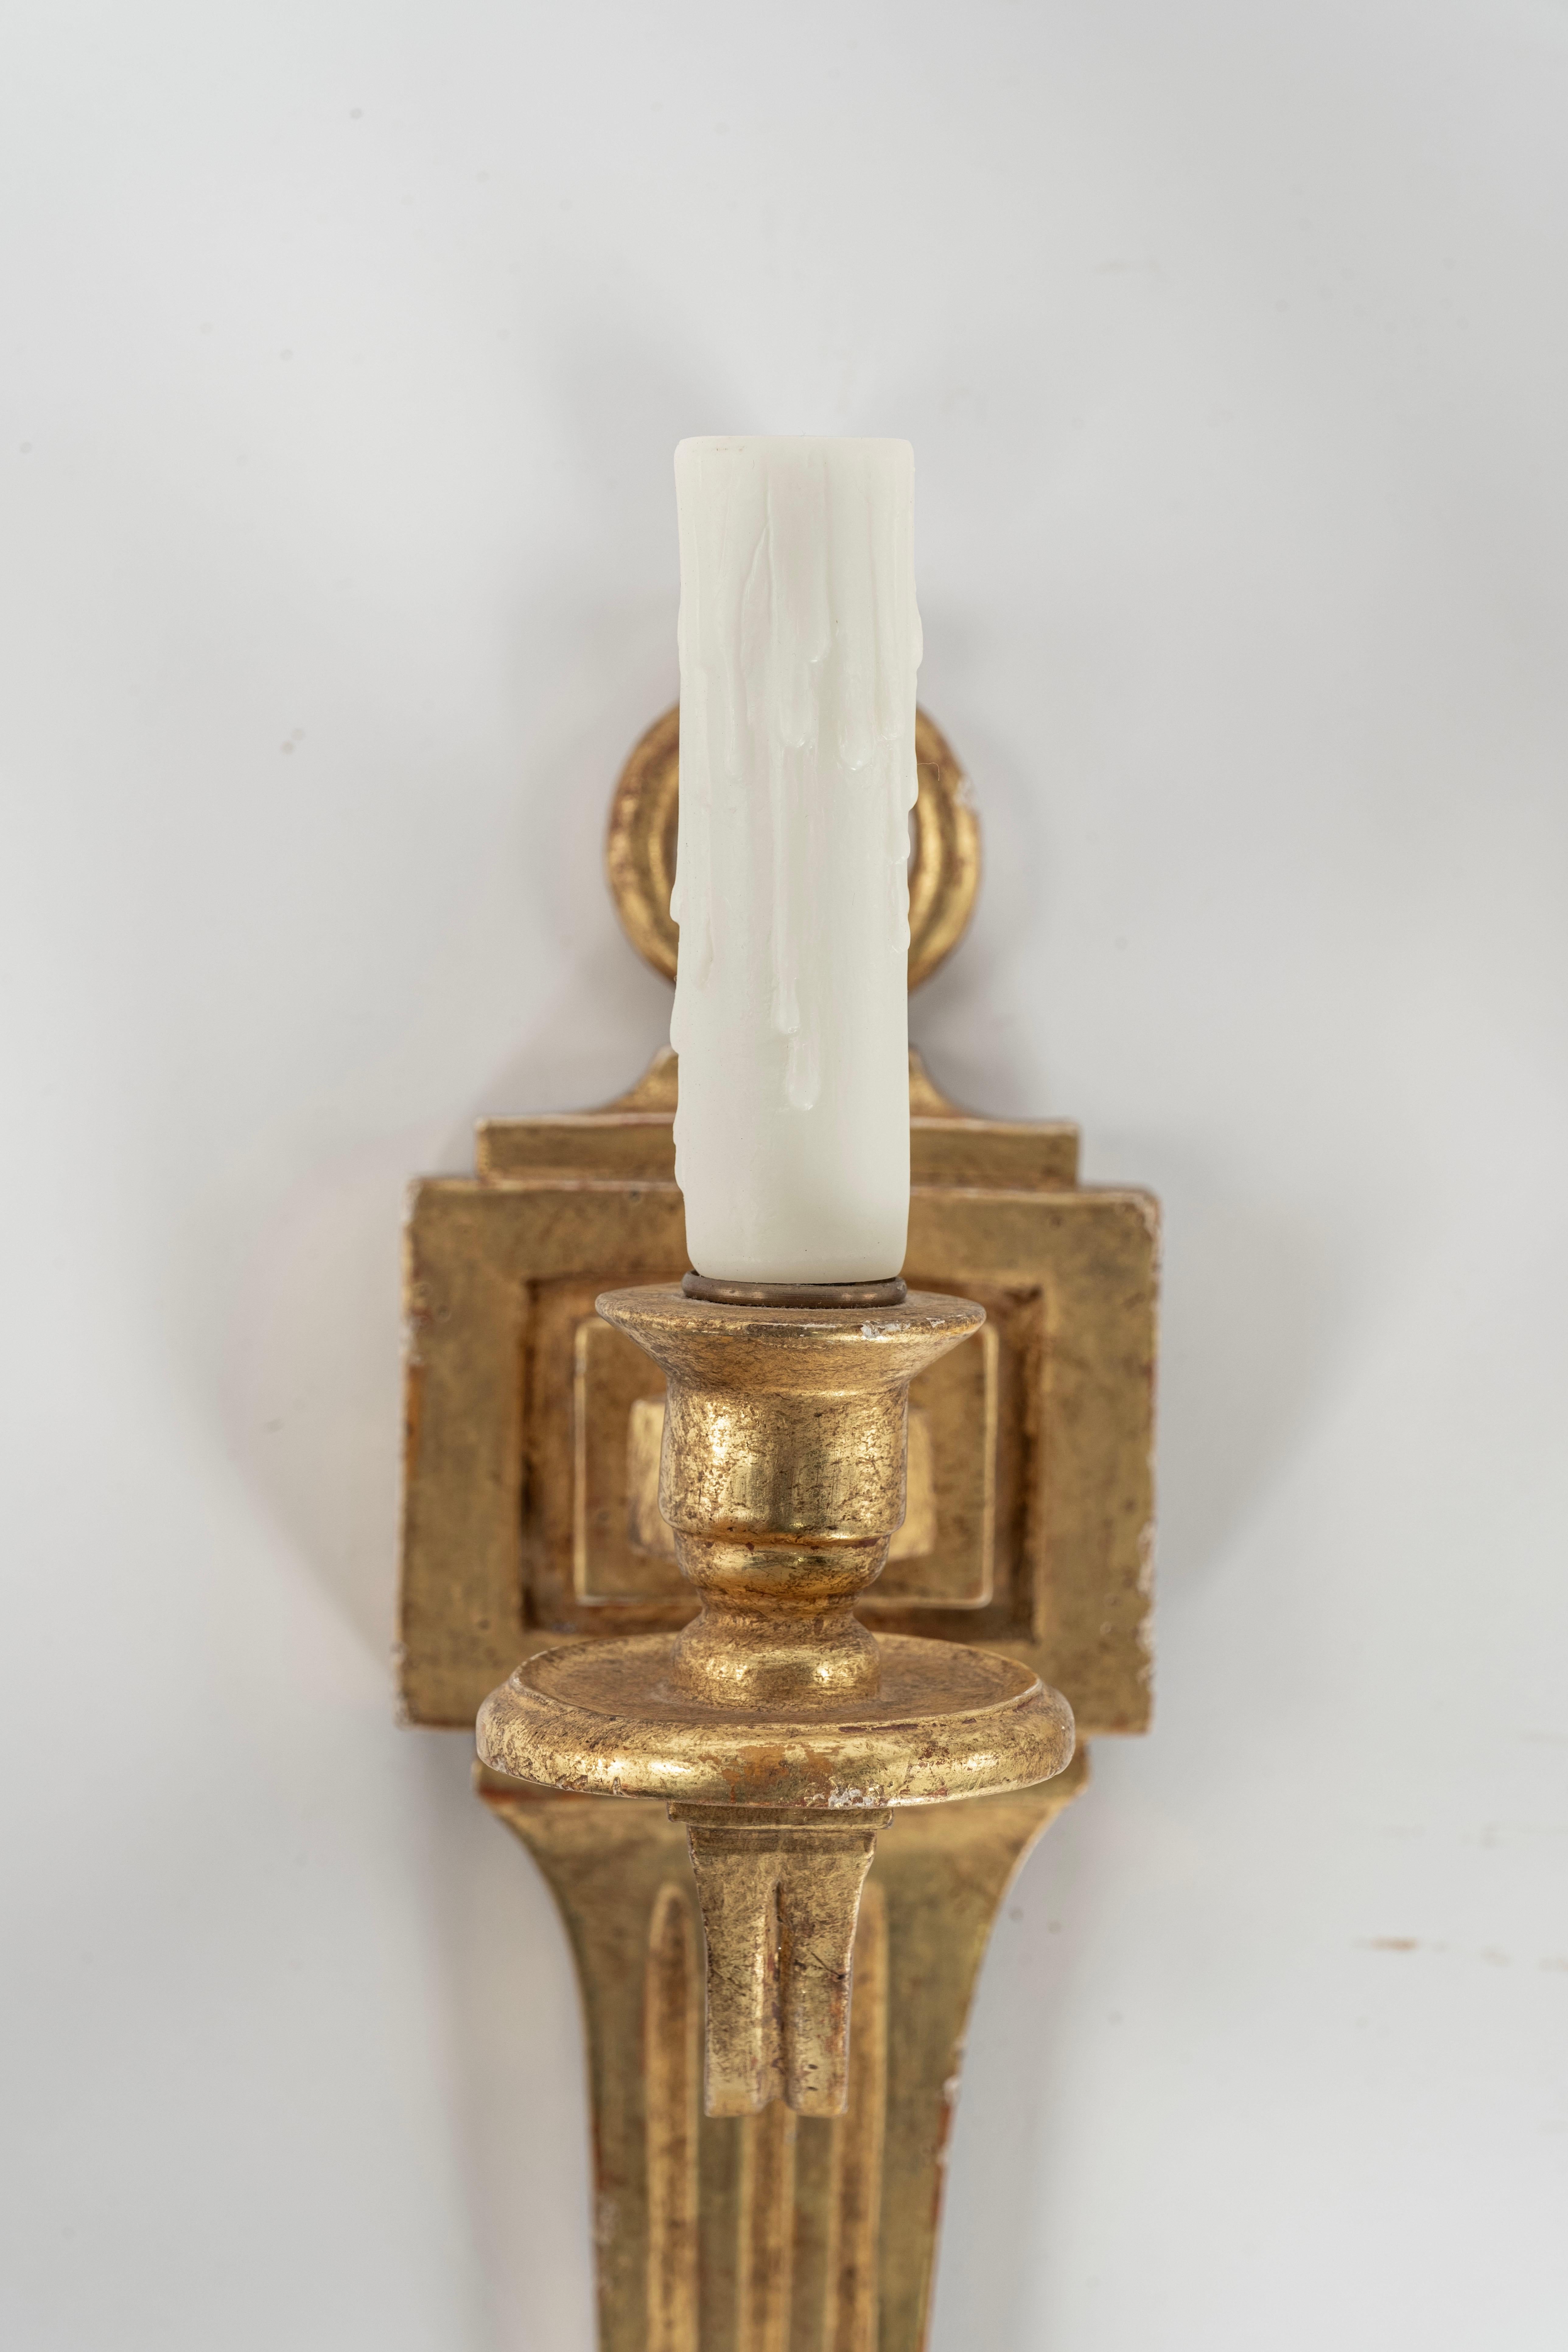  Pair of Sconces by Paul Ferrante in 22 Karat Gold with a single light on each one. 60 watts max per bulb.  If a shade is added the following size is recommended:  3.5